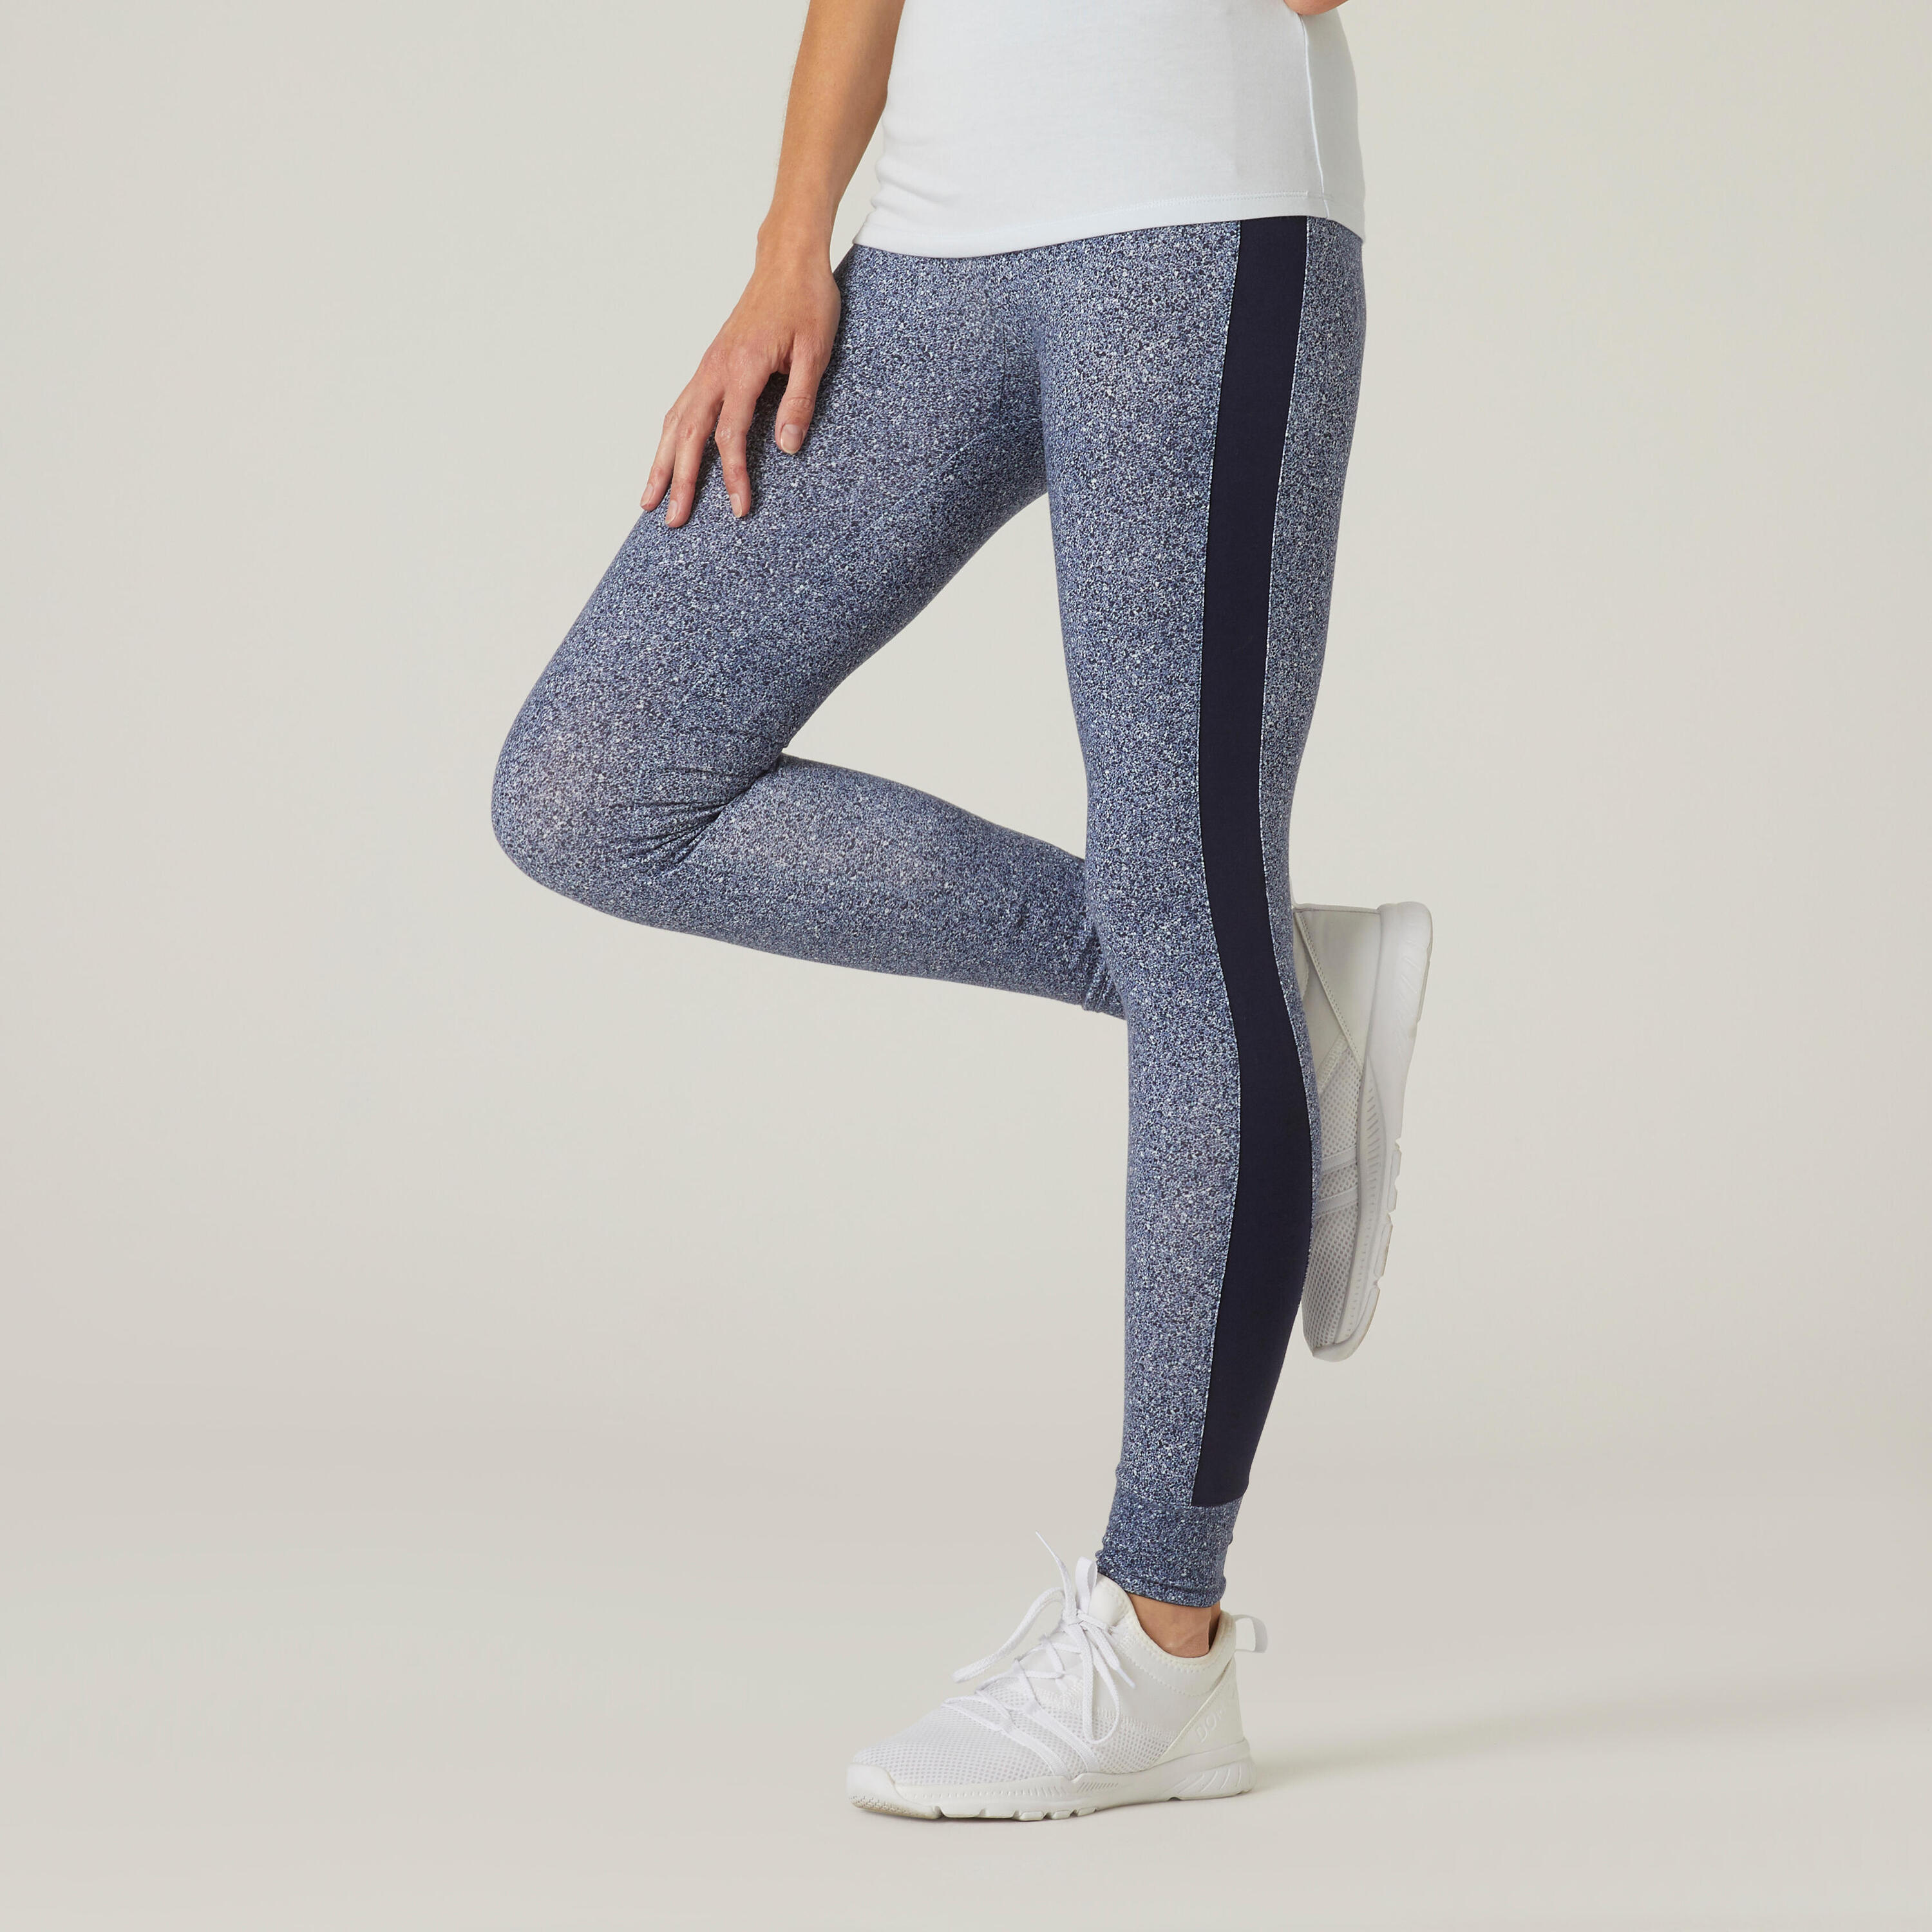 Stretchy High-Waisted Cotton Fitness Leggings - Blue Print 1/6